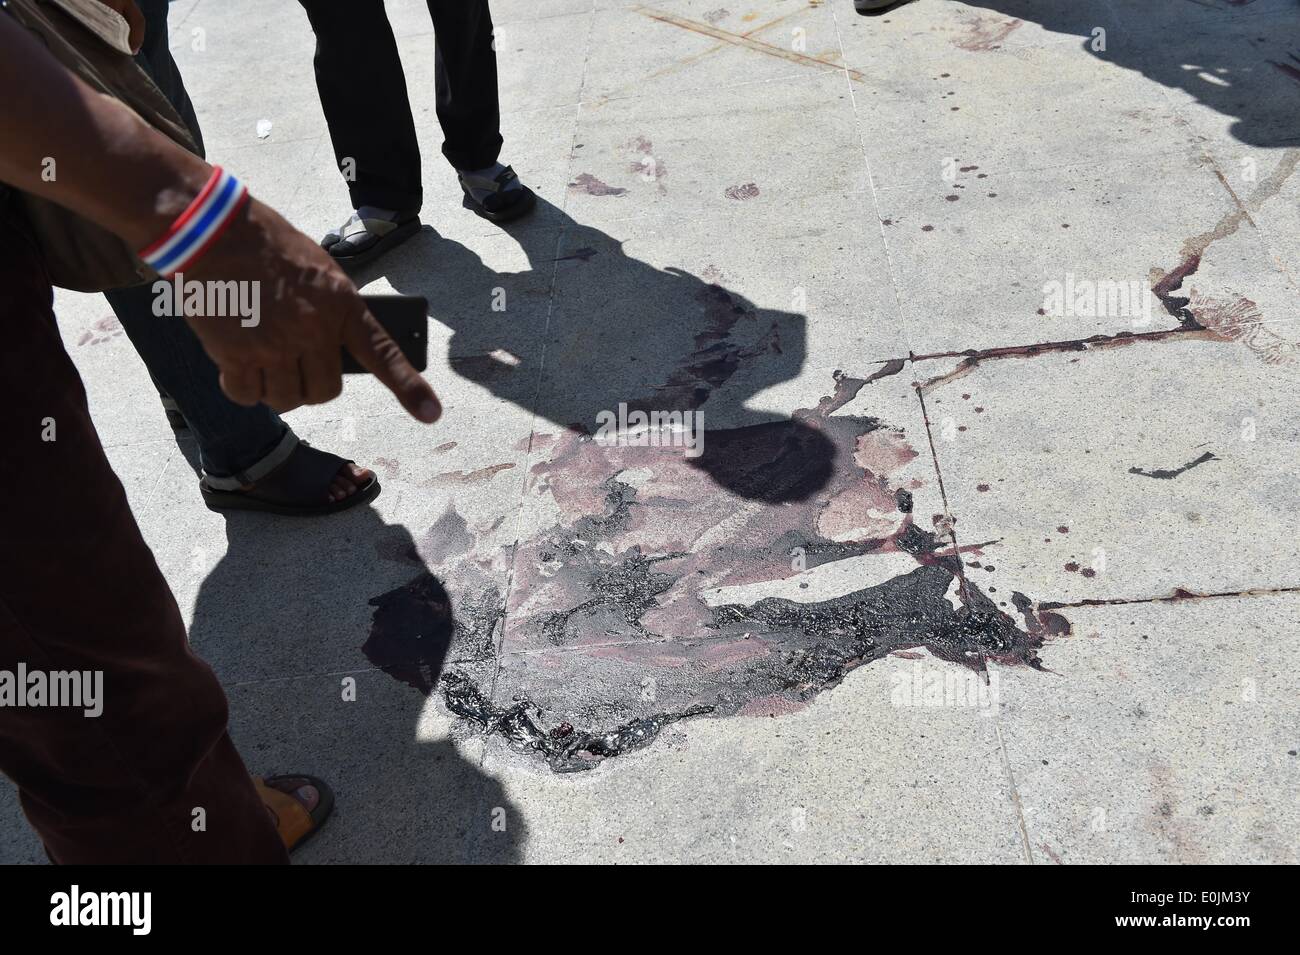 Bangkok, Thailand. 15th May, 2014. People look at the blood stains at the site of an attack near the Democracy Monument in Bangkok, Thailand, May 15, 2014. Two anti-government protestors were killed and 22 others injured in a gun and grenade attack here early Thursday, local media reported. © Lui Siu Wai/Xinhua/Alamy Live News Stock Photo